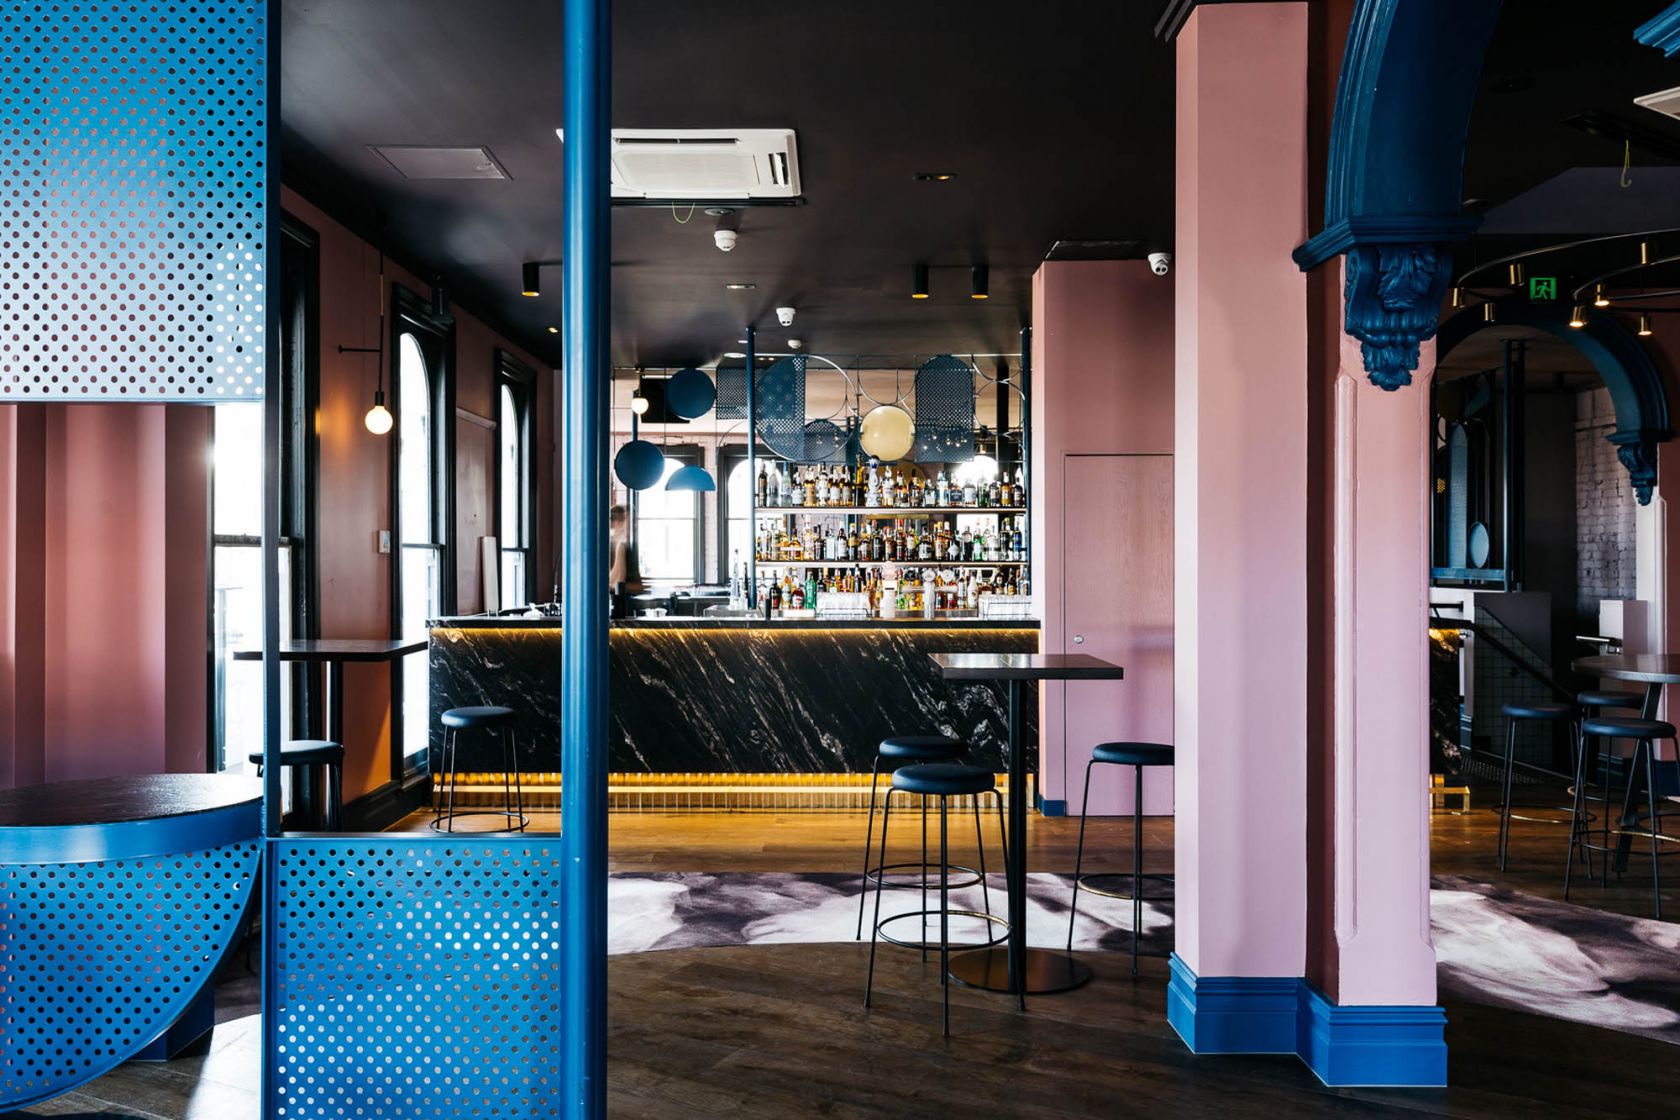 village belle hotel hospitality construction vic st kilda barkly st doulton lounge pink lounge gold pendant lights casual cosy bar melbourne blue perforated metal marble bar